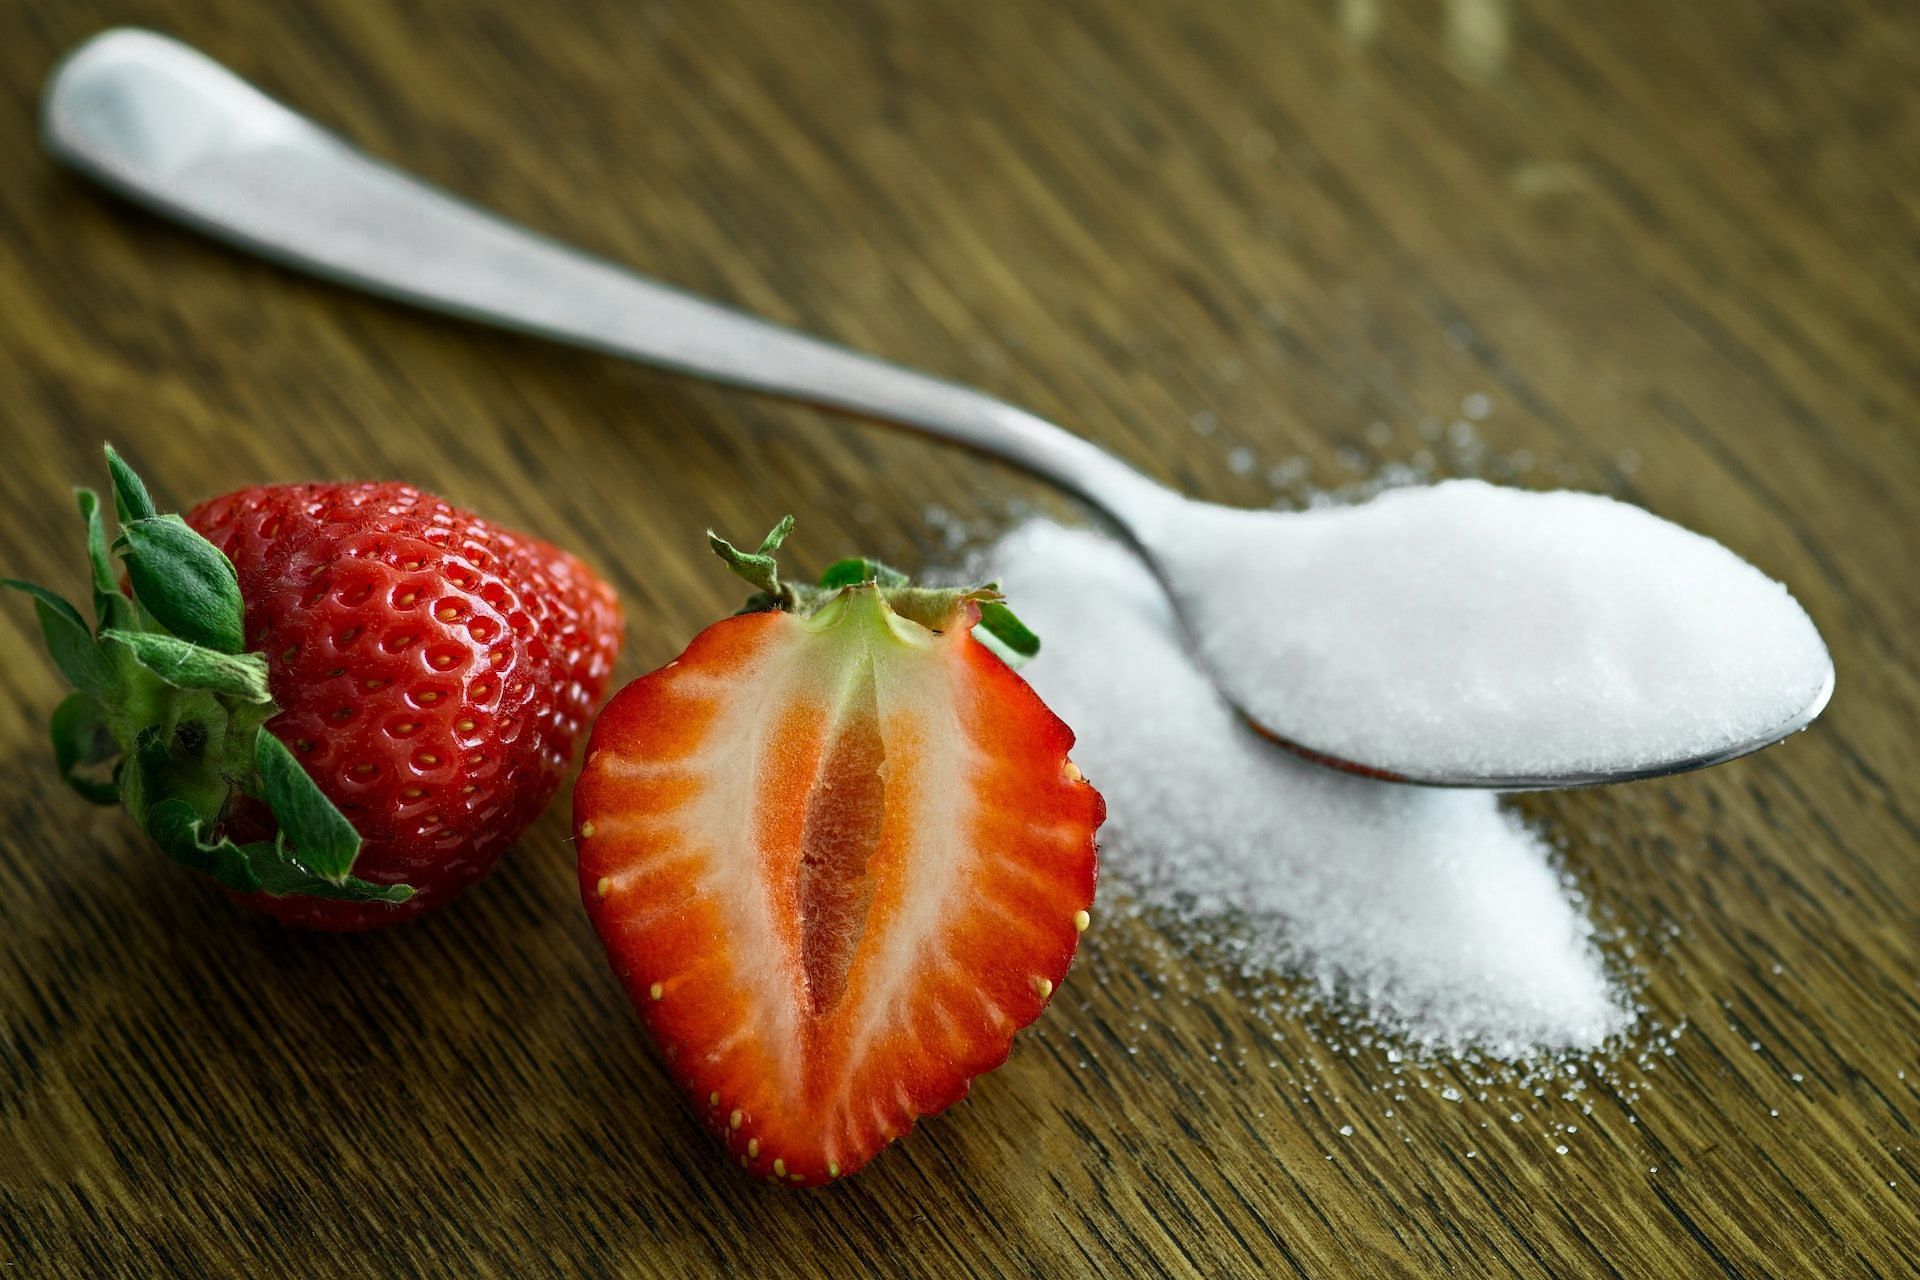 There are plenty of sugar substitutes to try. (Photo via Pexels/mali maeder)